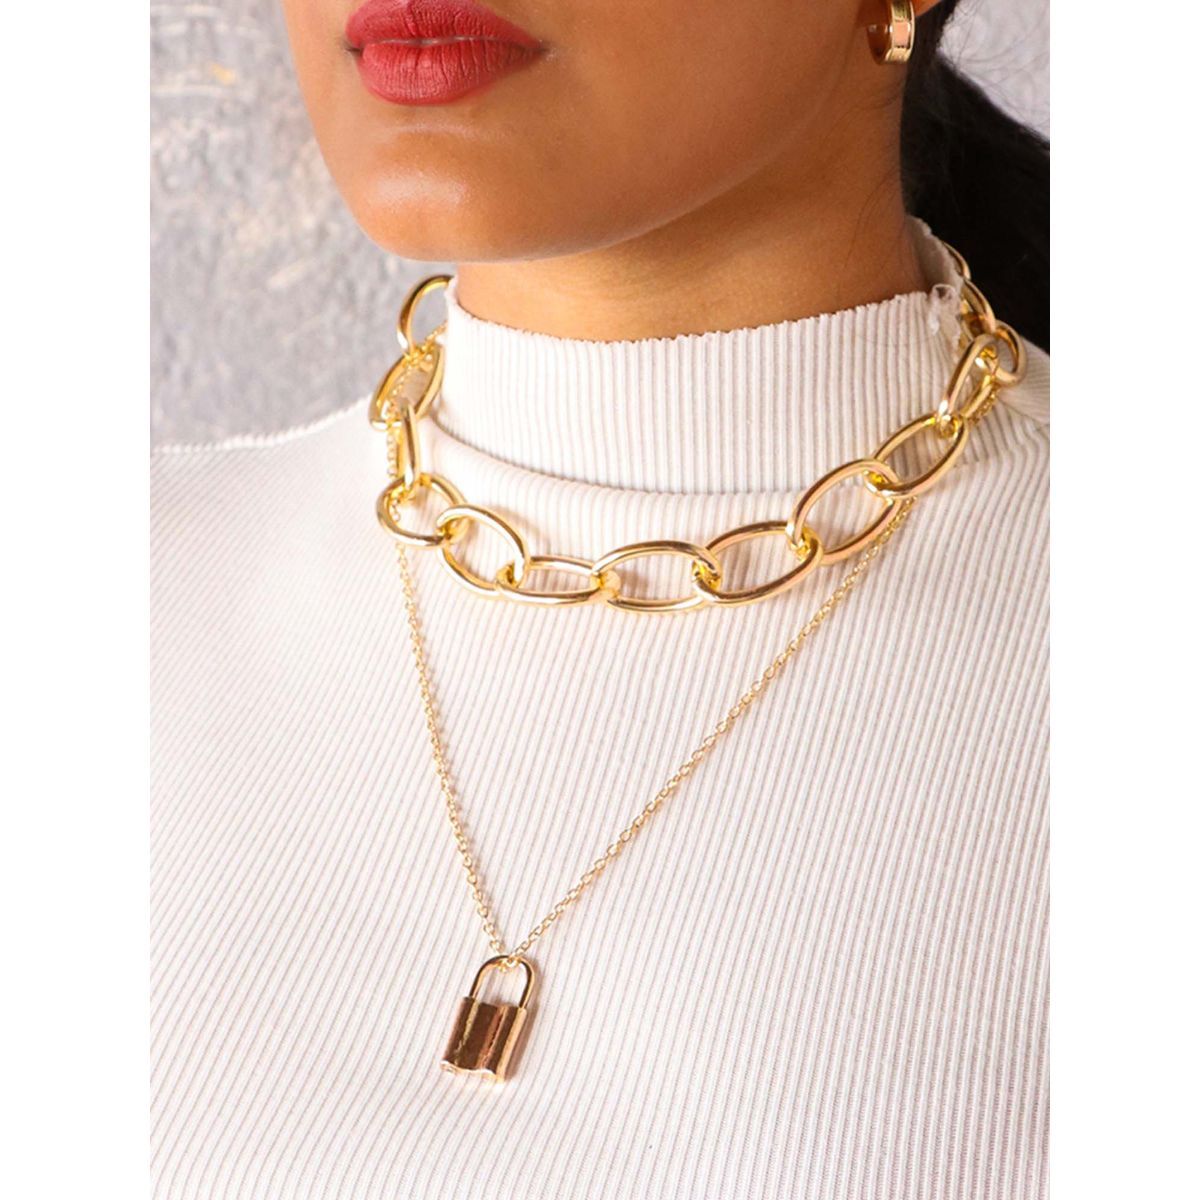 Chic Retro Revival Chain Lock Pendant - Unlock Your Style Power | Lock  necklace, Necklace, Chain